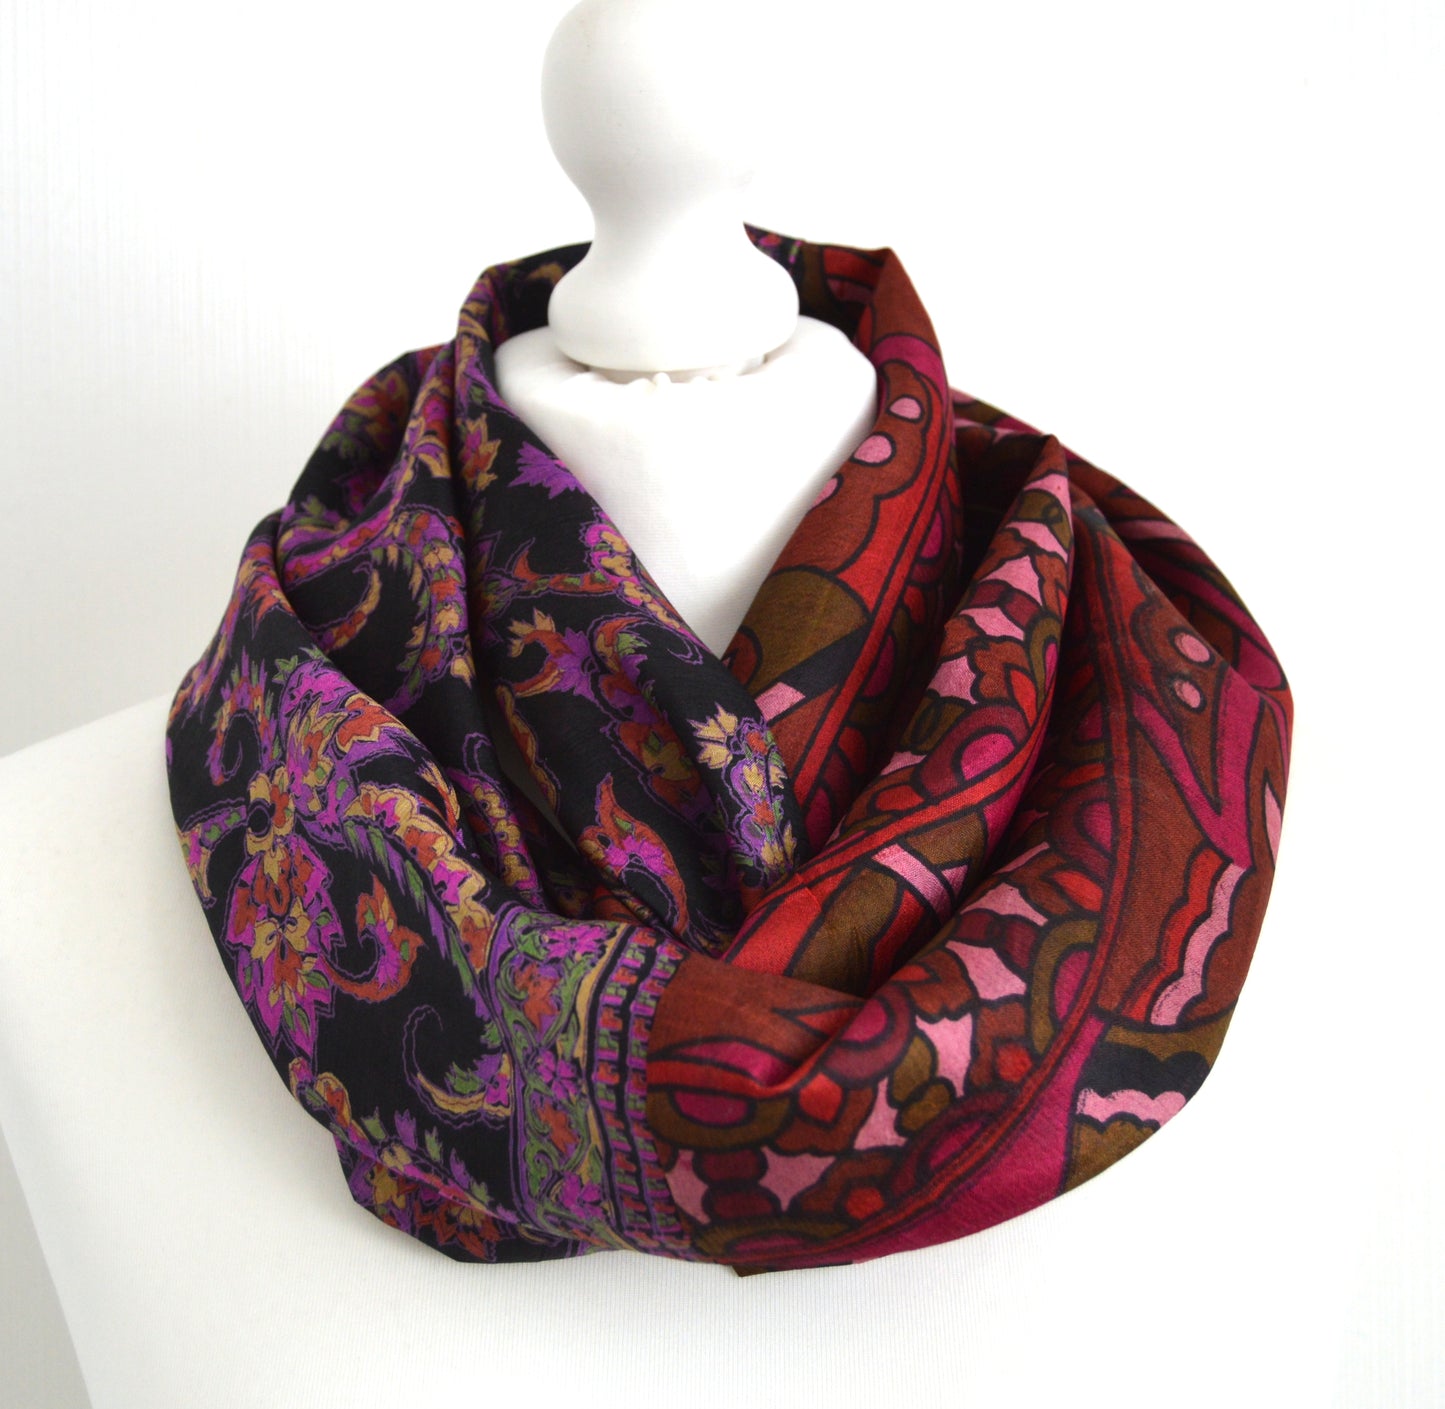 Black Magenta Upcycled Vintage Sari Silk Infinity Loop Scarf - Eco Friendly Zero Waste Womens Scarf - Perfect Mothers Day Gift For Her